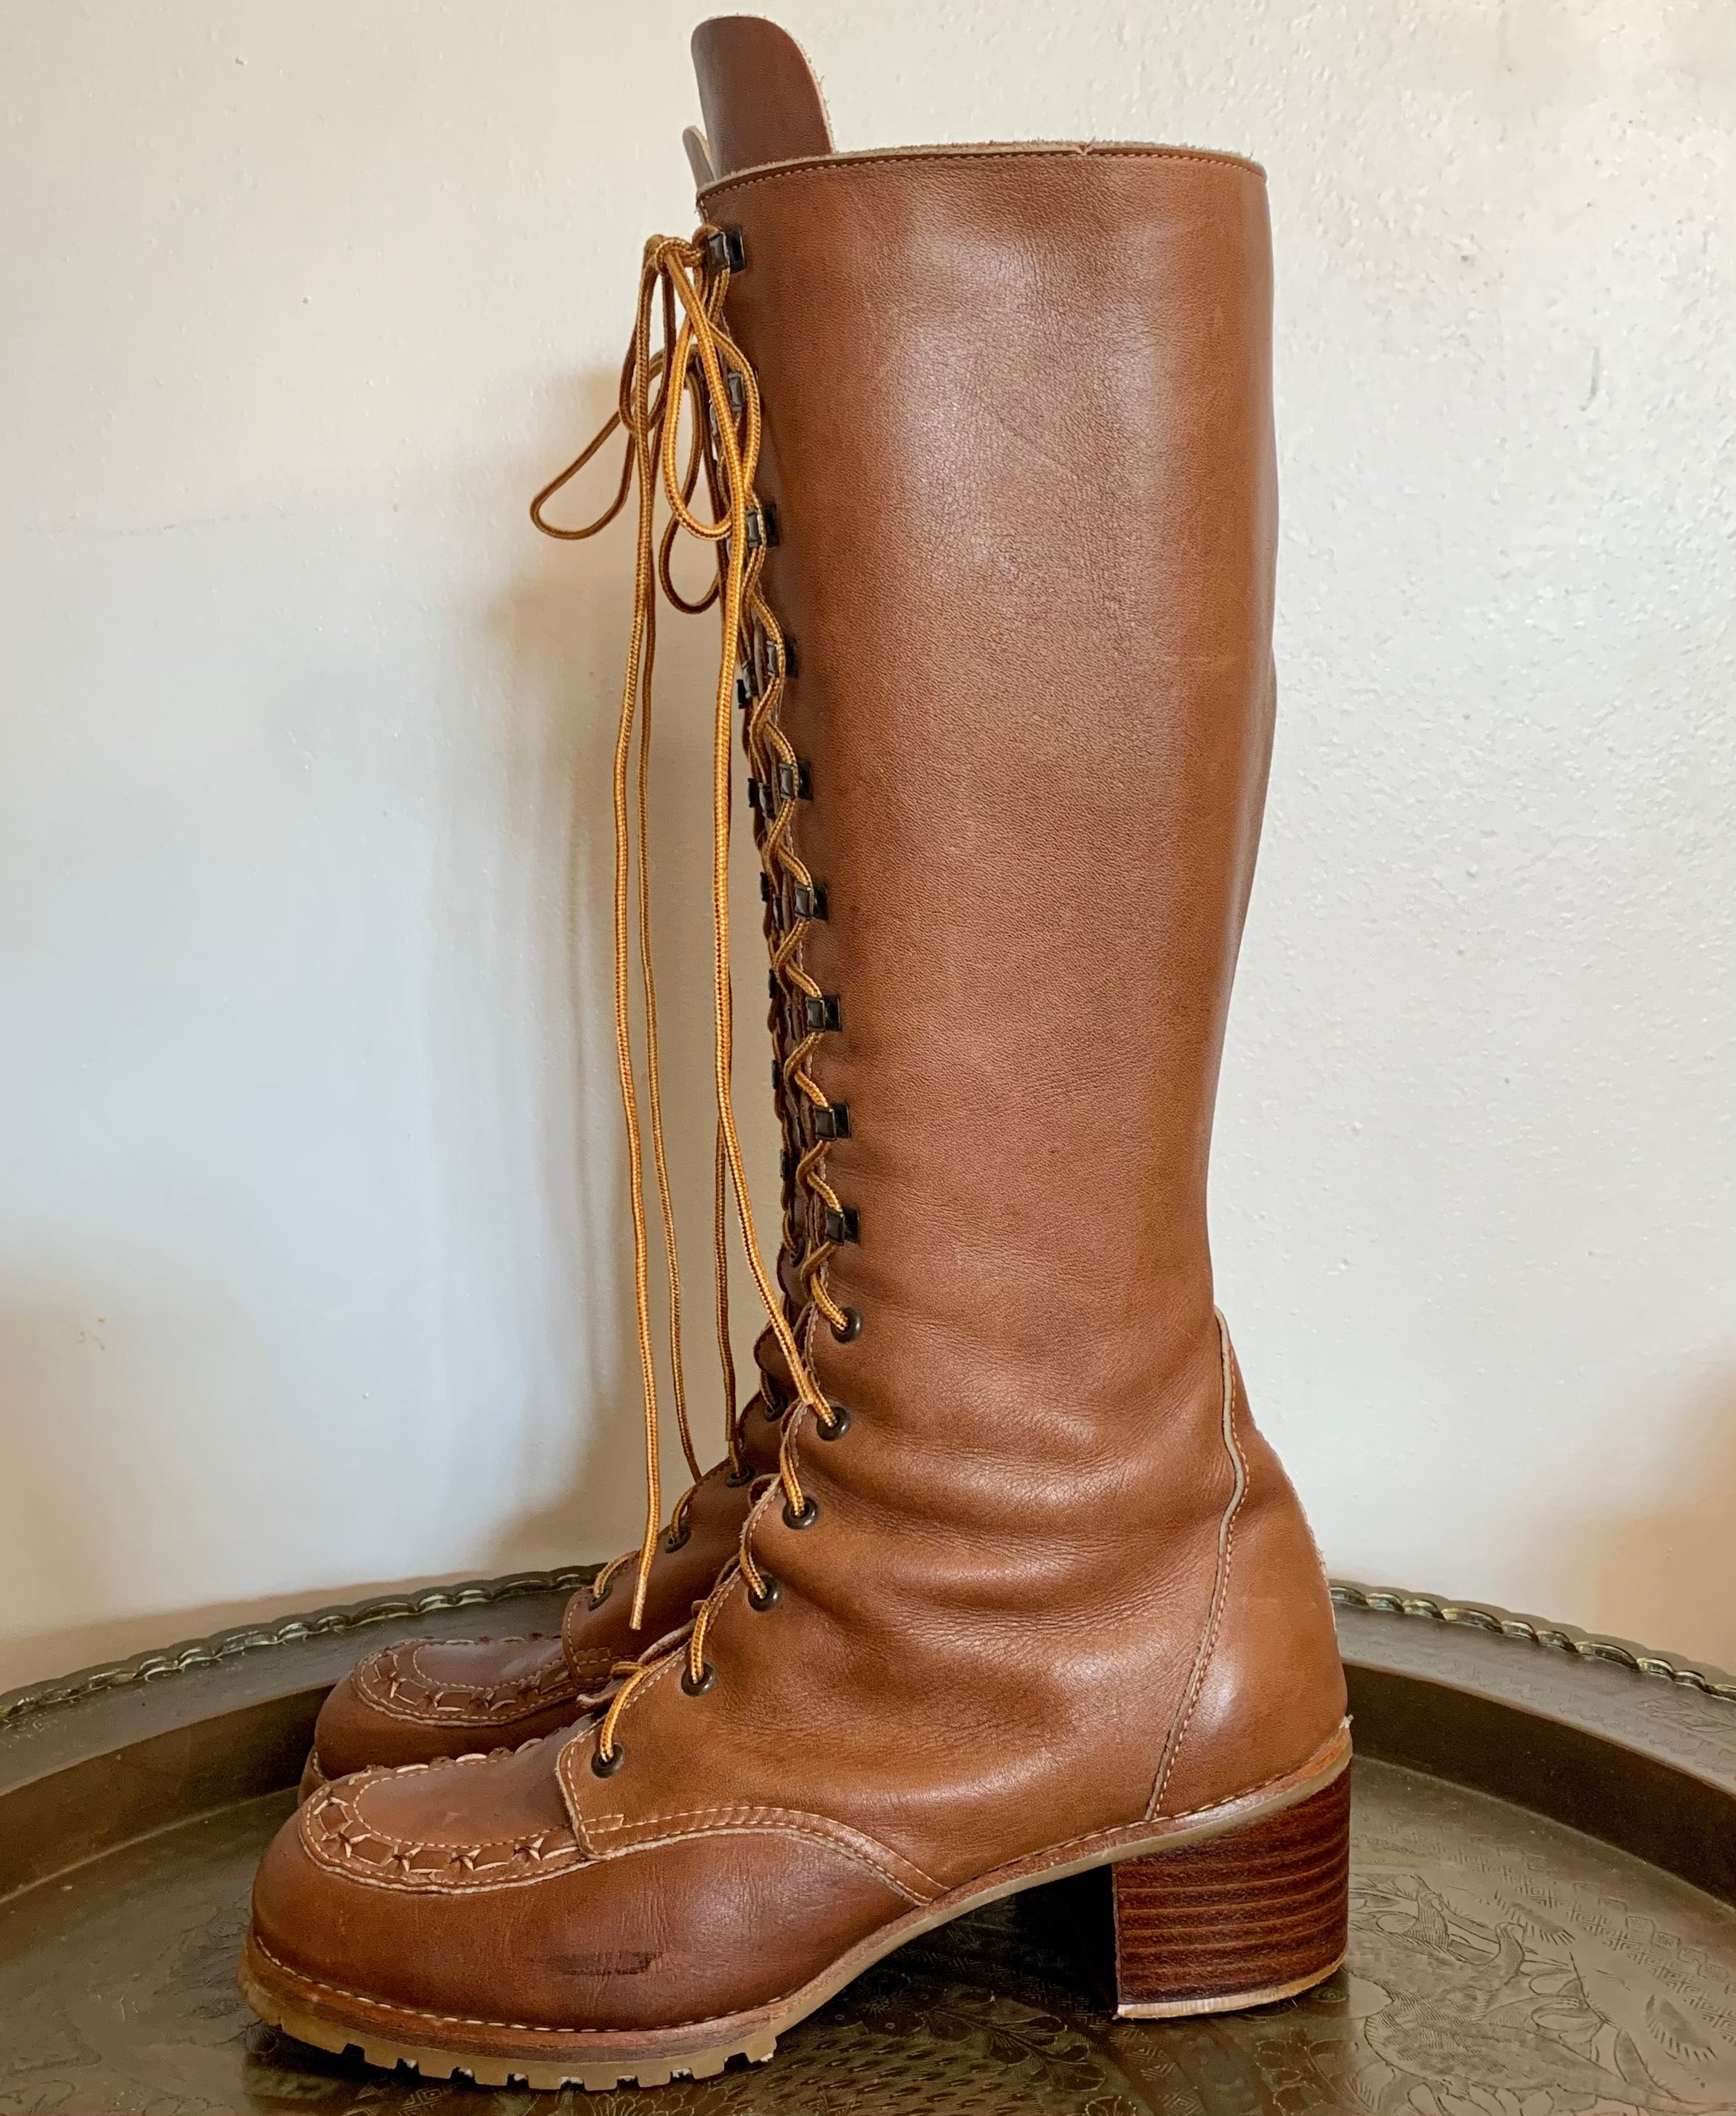 70s brown leather boots - Gem